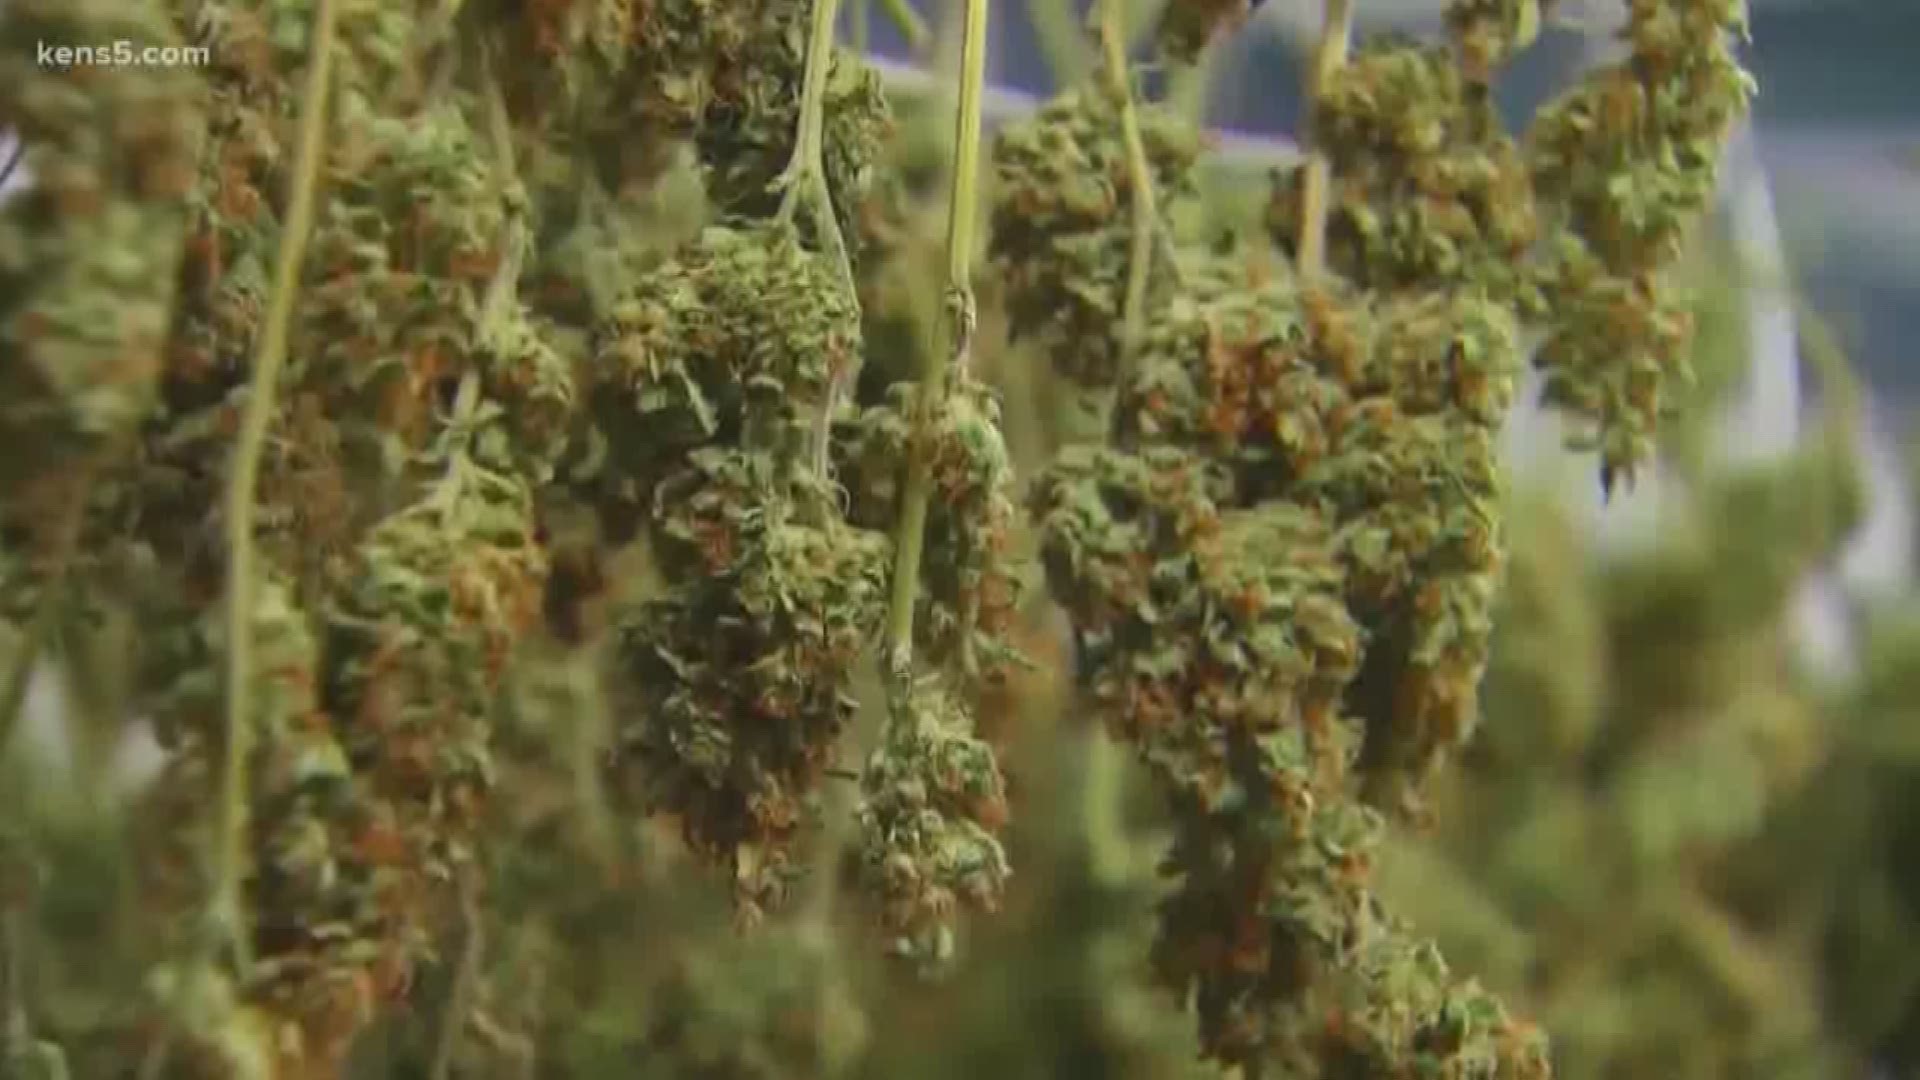 Bexar County officials are working on lab techniques to measure THC levels after hemp legalization has complicated the process for prosecuting marijuana cases.